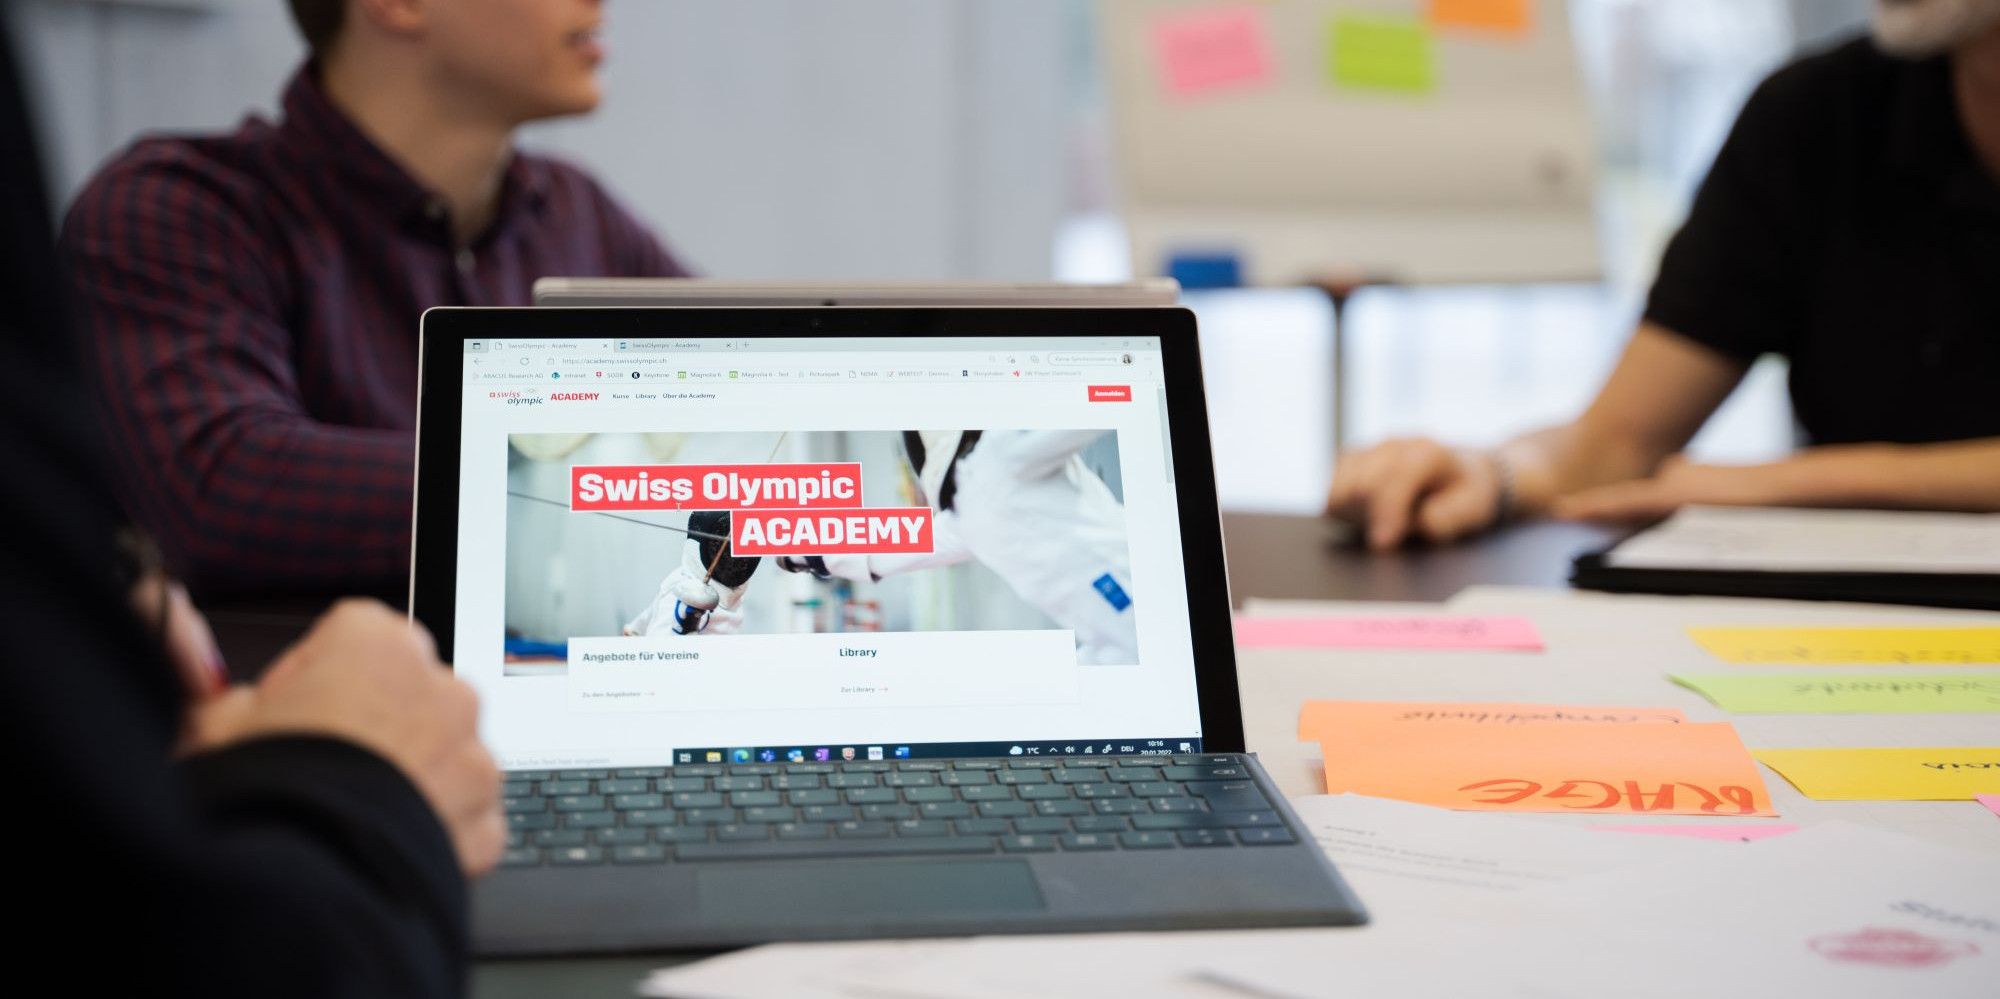 Swiss Olympic launches club management course to strengthen volunteer work